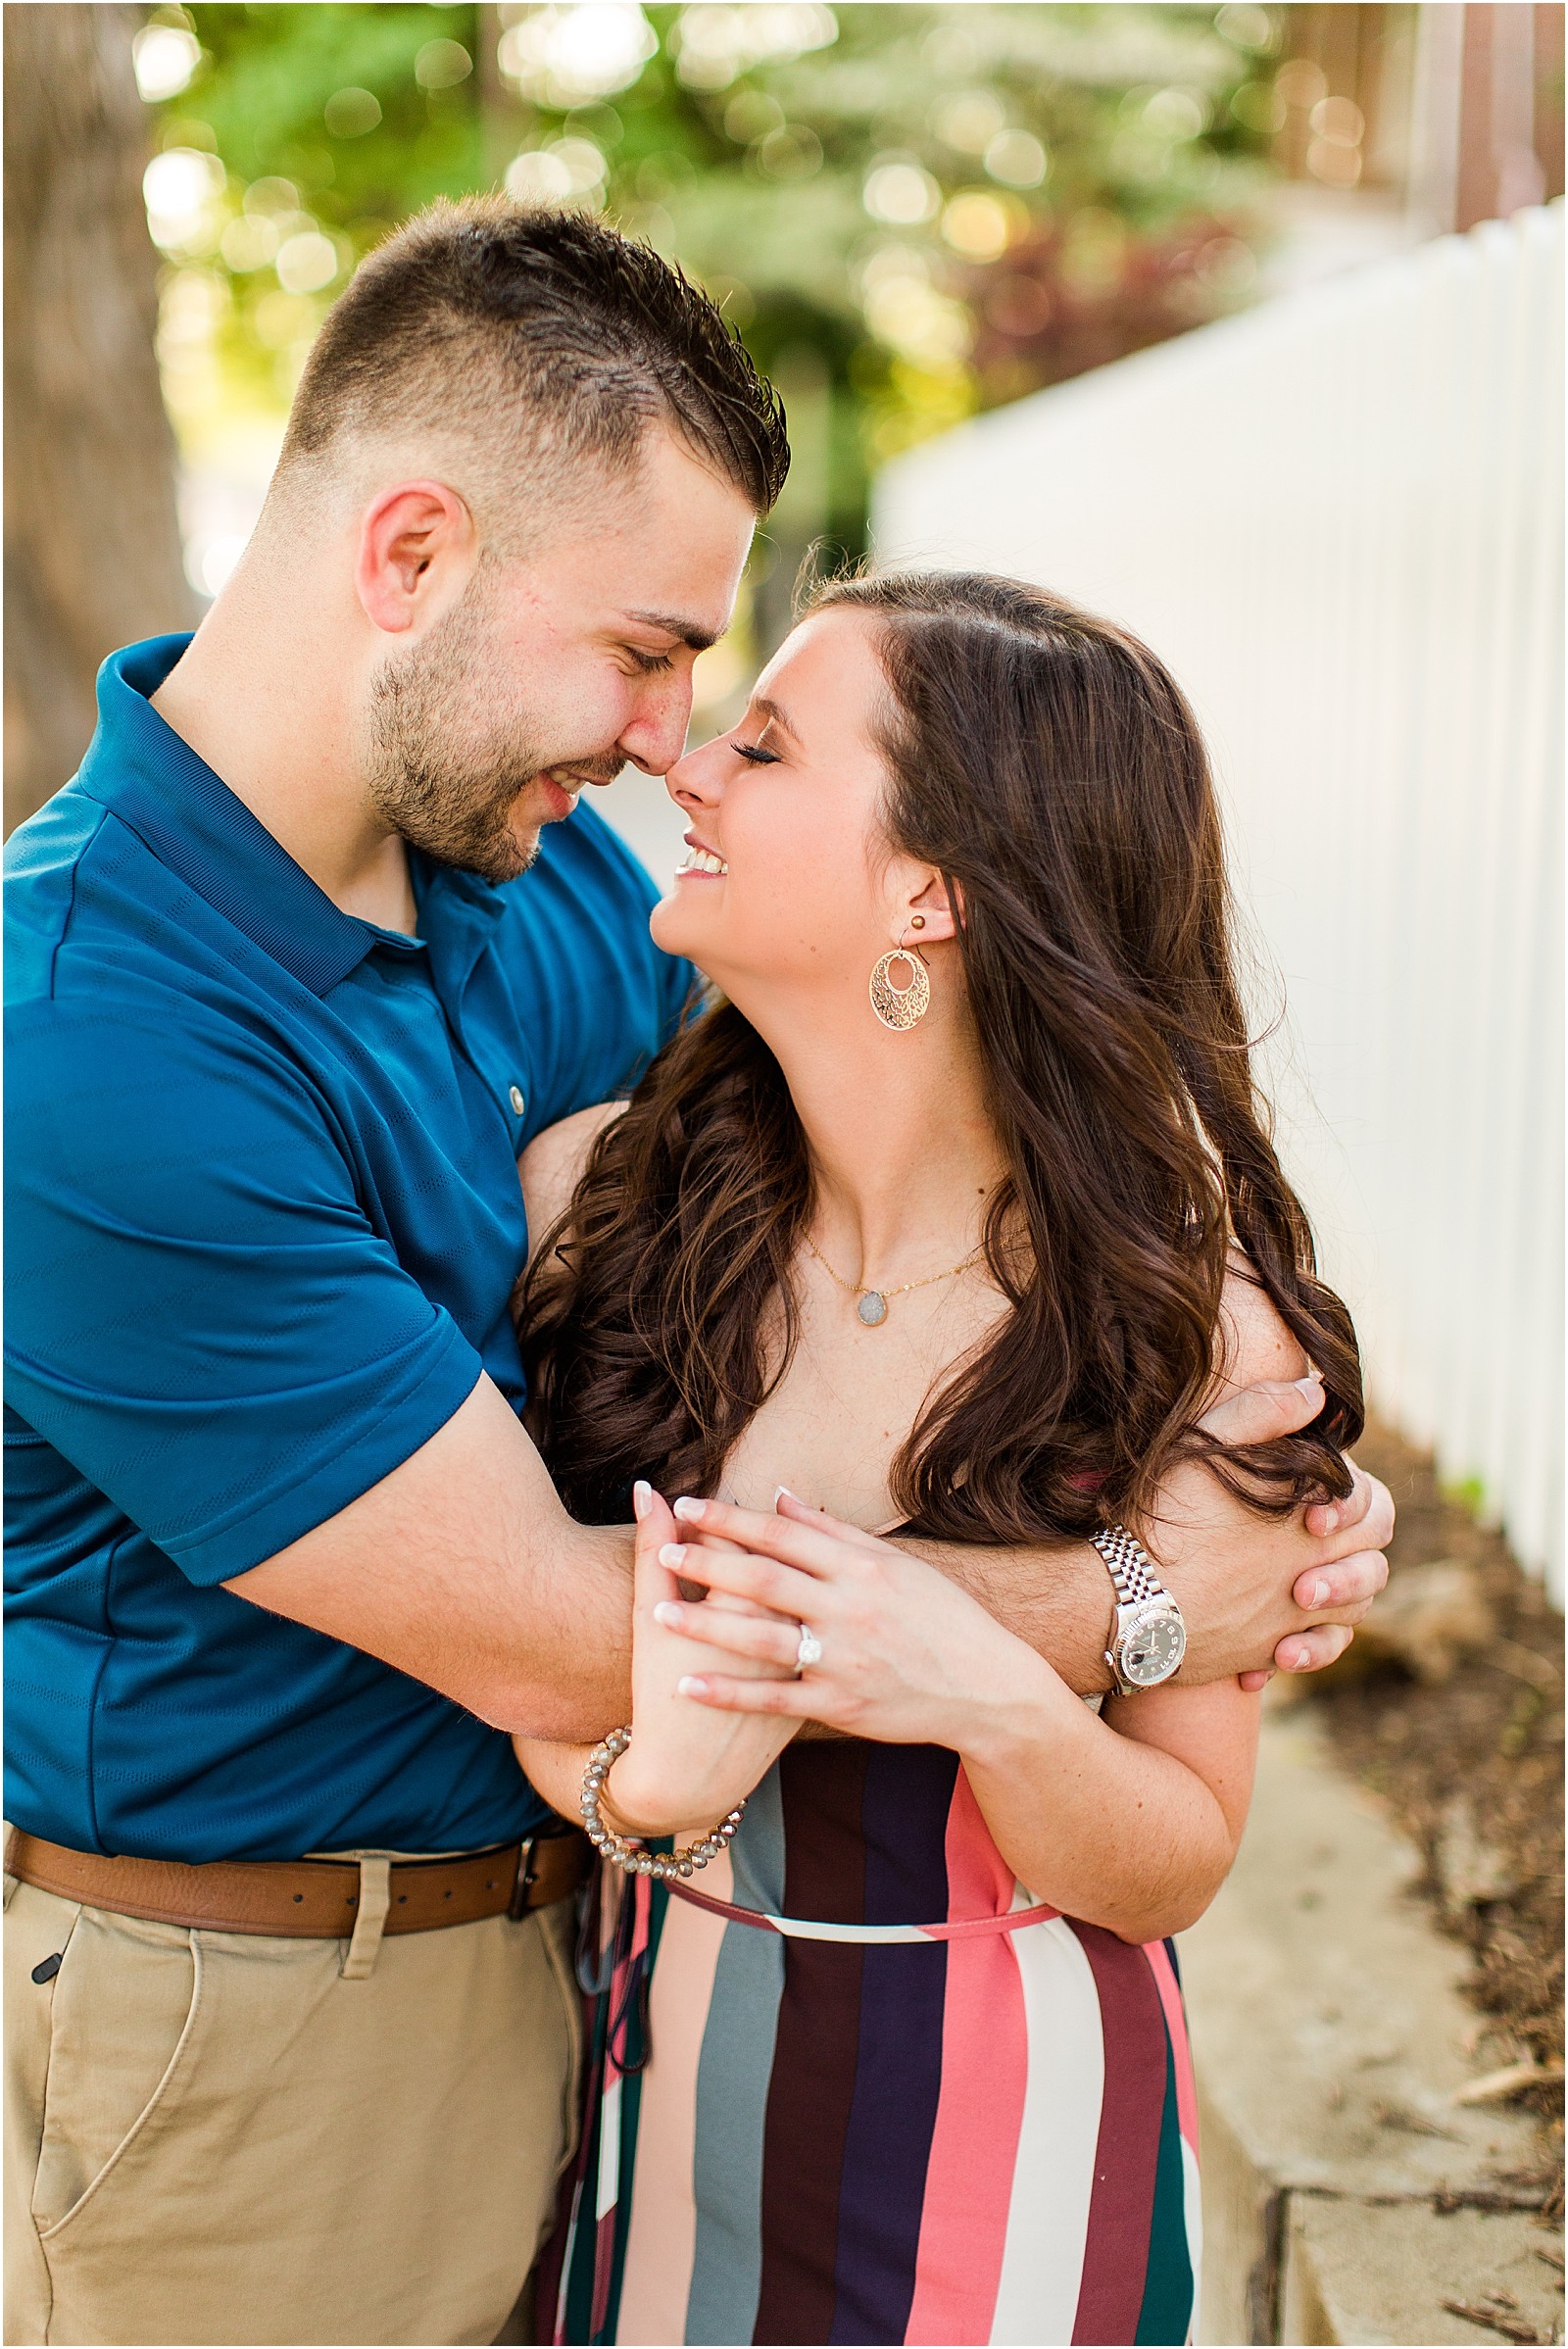 Downtown Newburgh Engagement Session | Matt and Blaire | Bret and Brandie Photography014.jpg